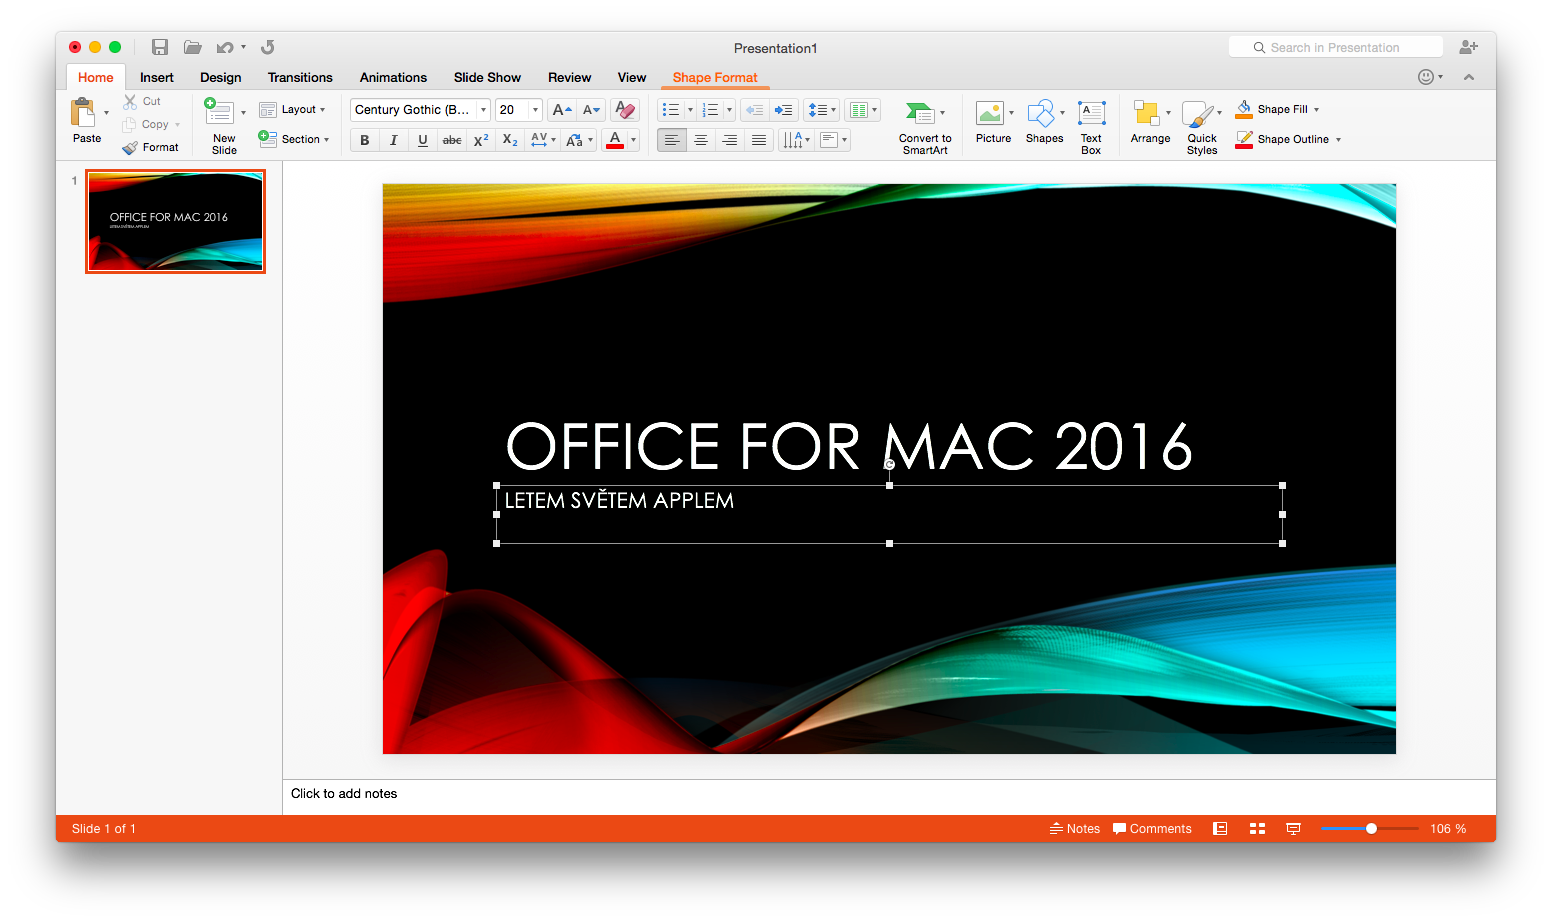 upgrading from officew 2013 to 2016 for mac